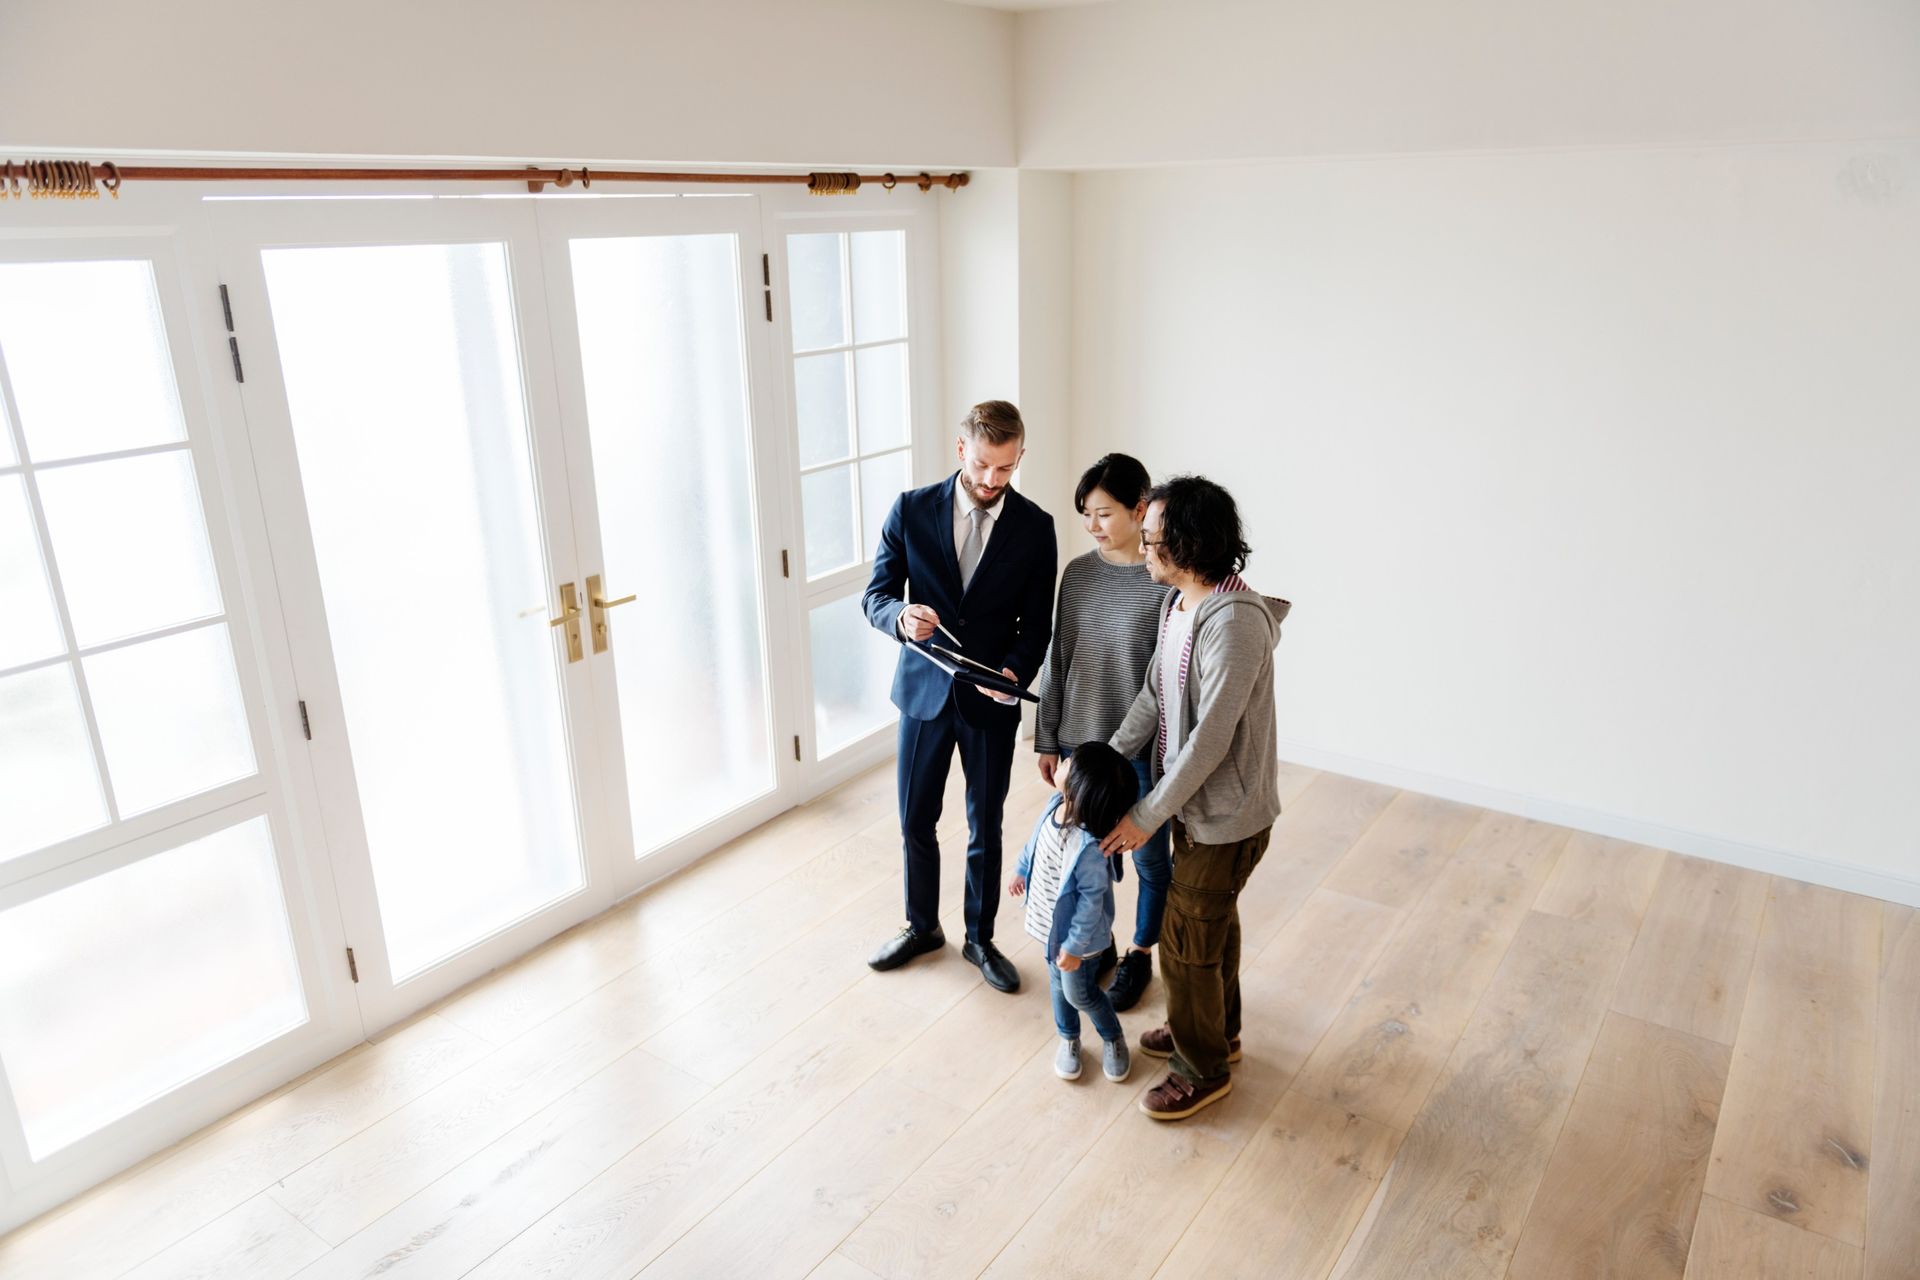 How to Impress Buyers and Sellers in Real Estate